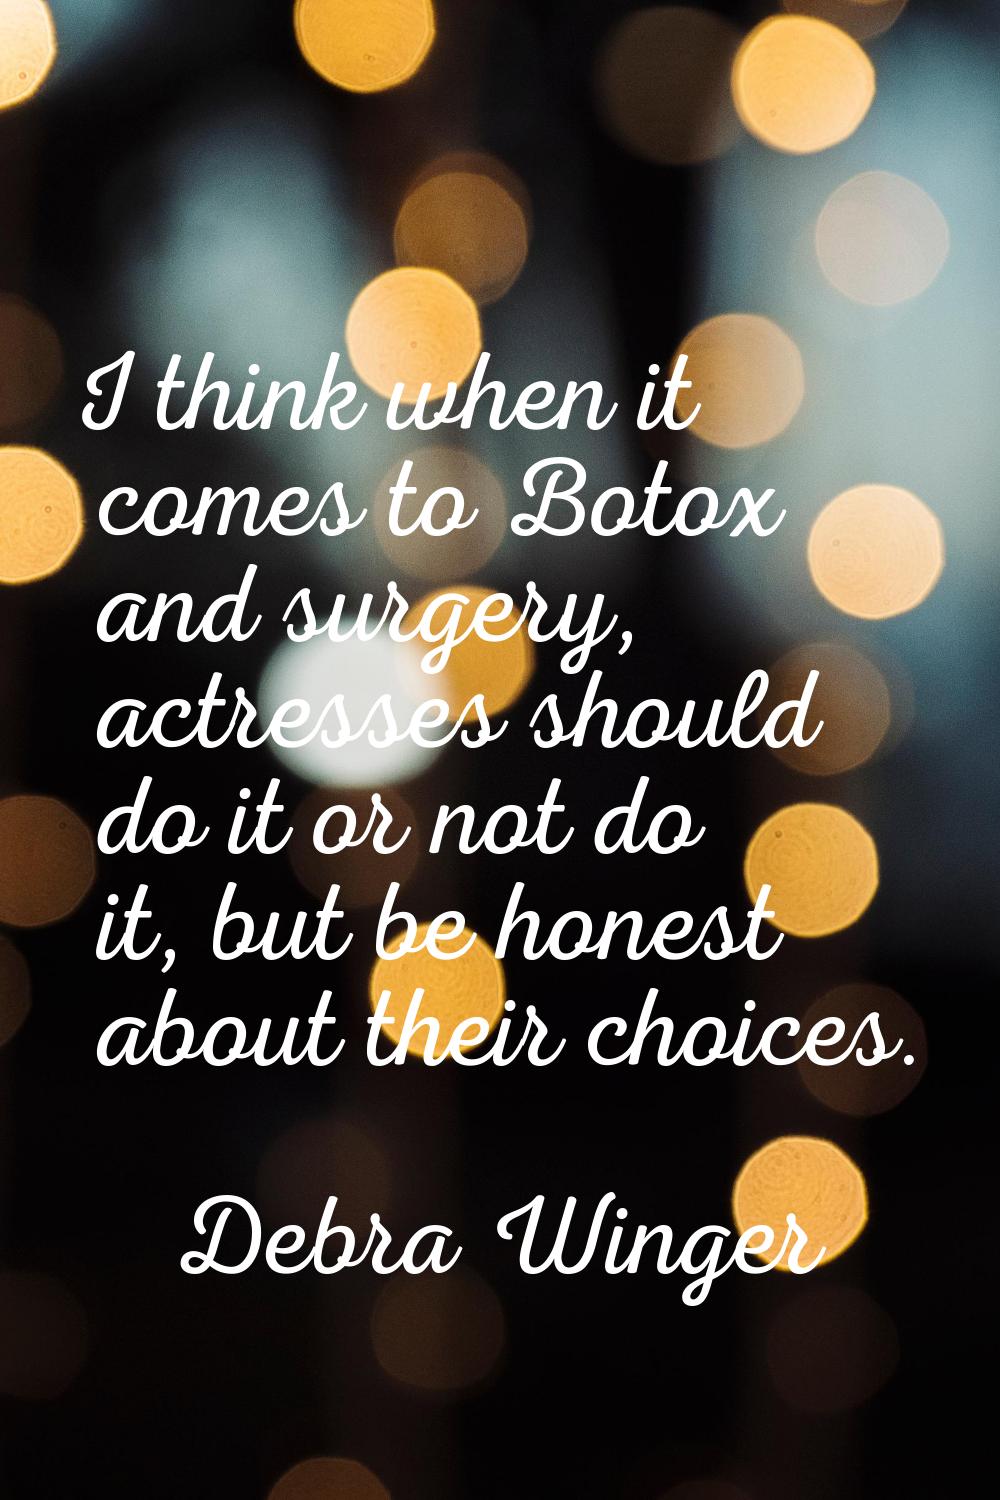 I think when it comes to Botox and surgery, actresses should do it or not do it, but be honest abou